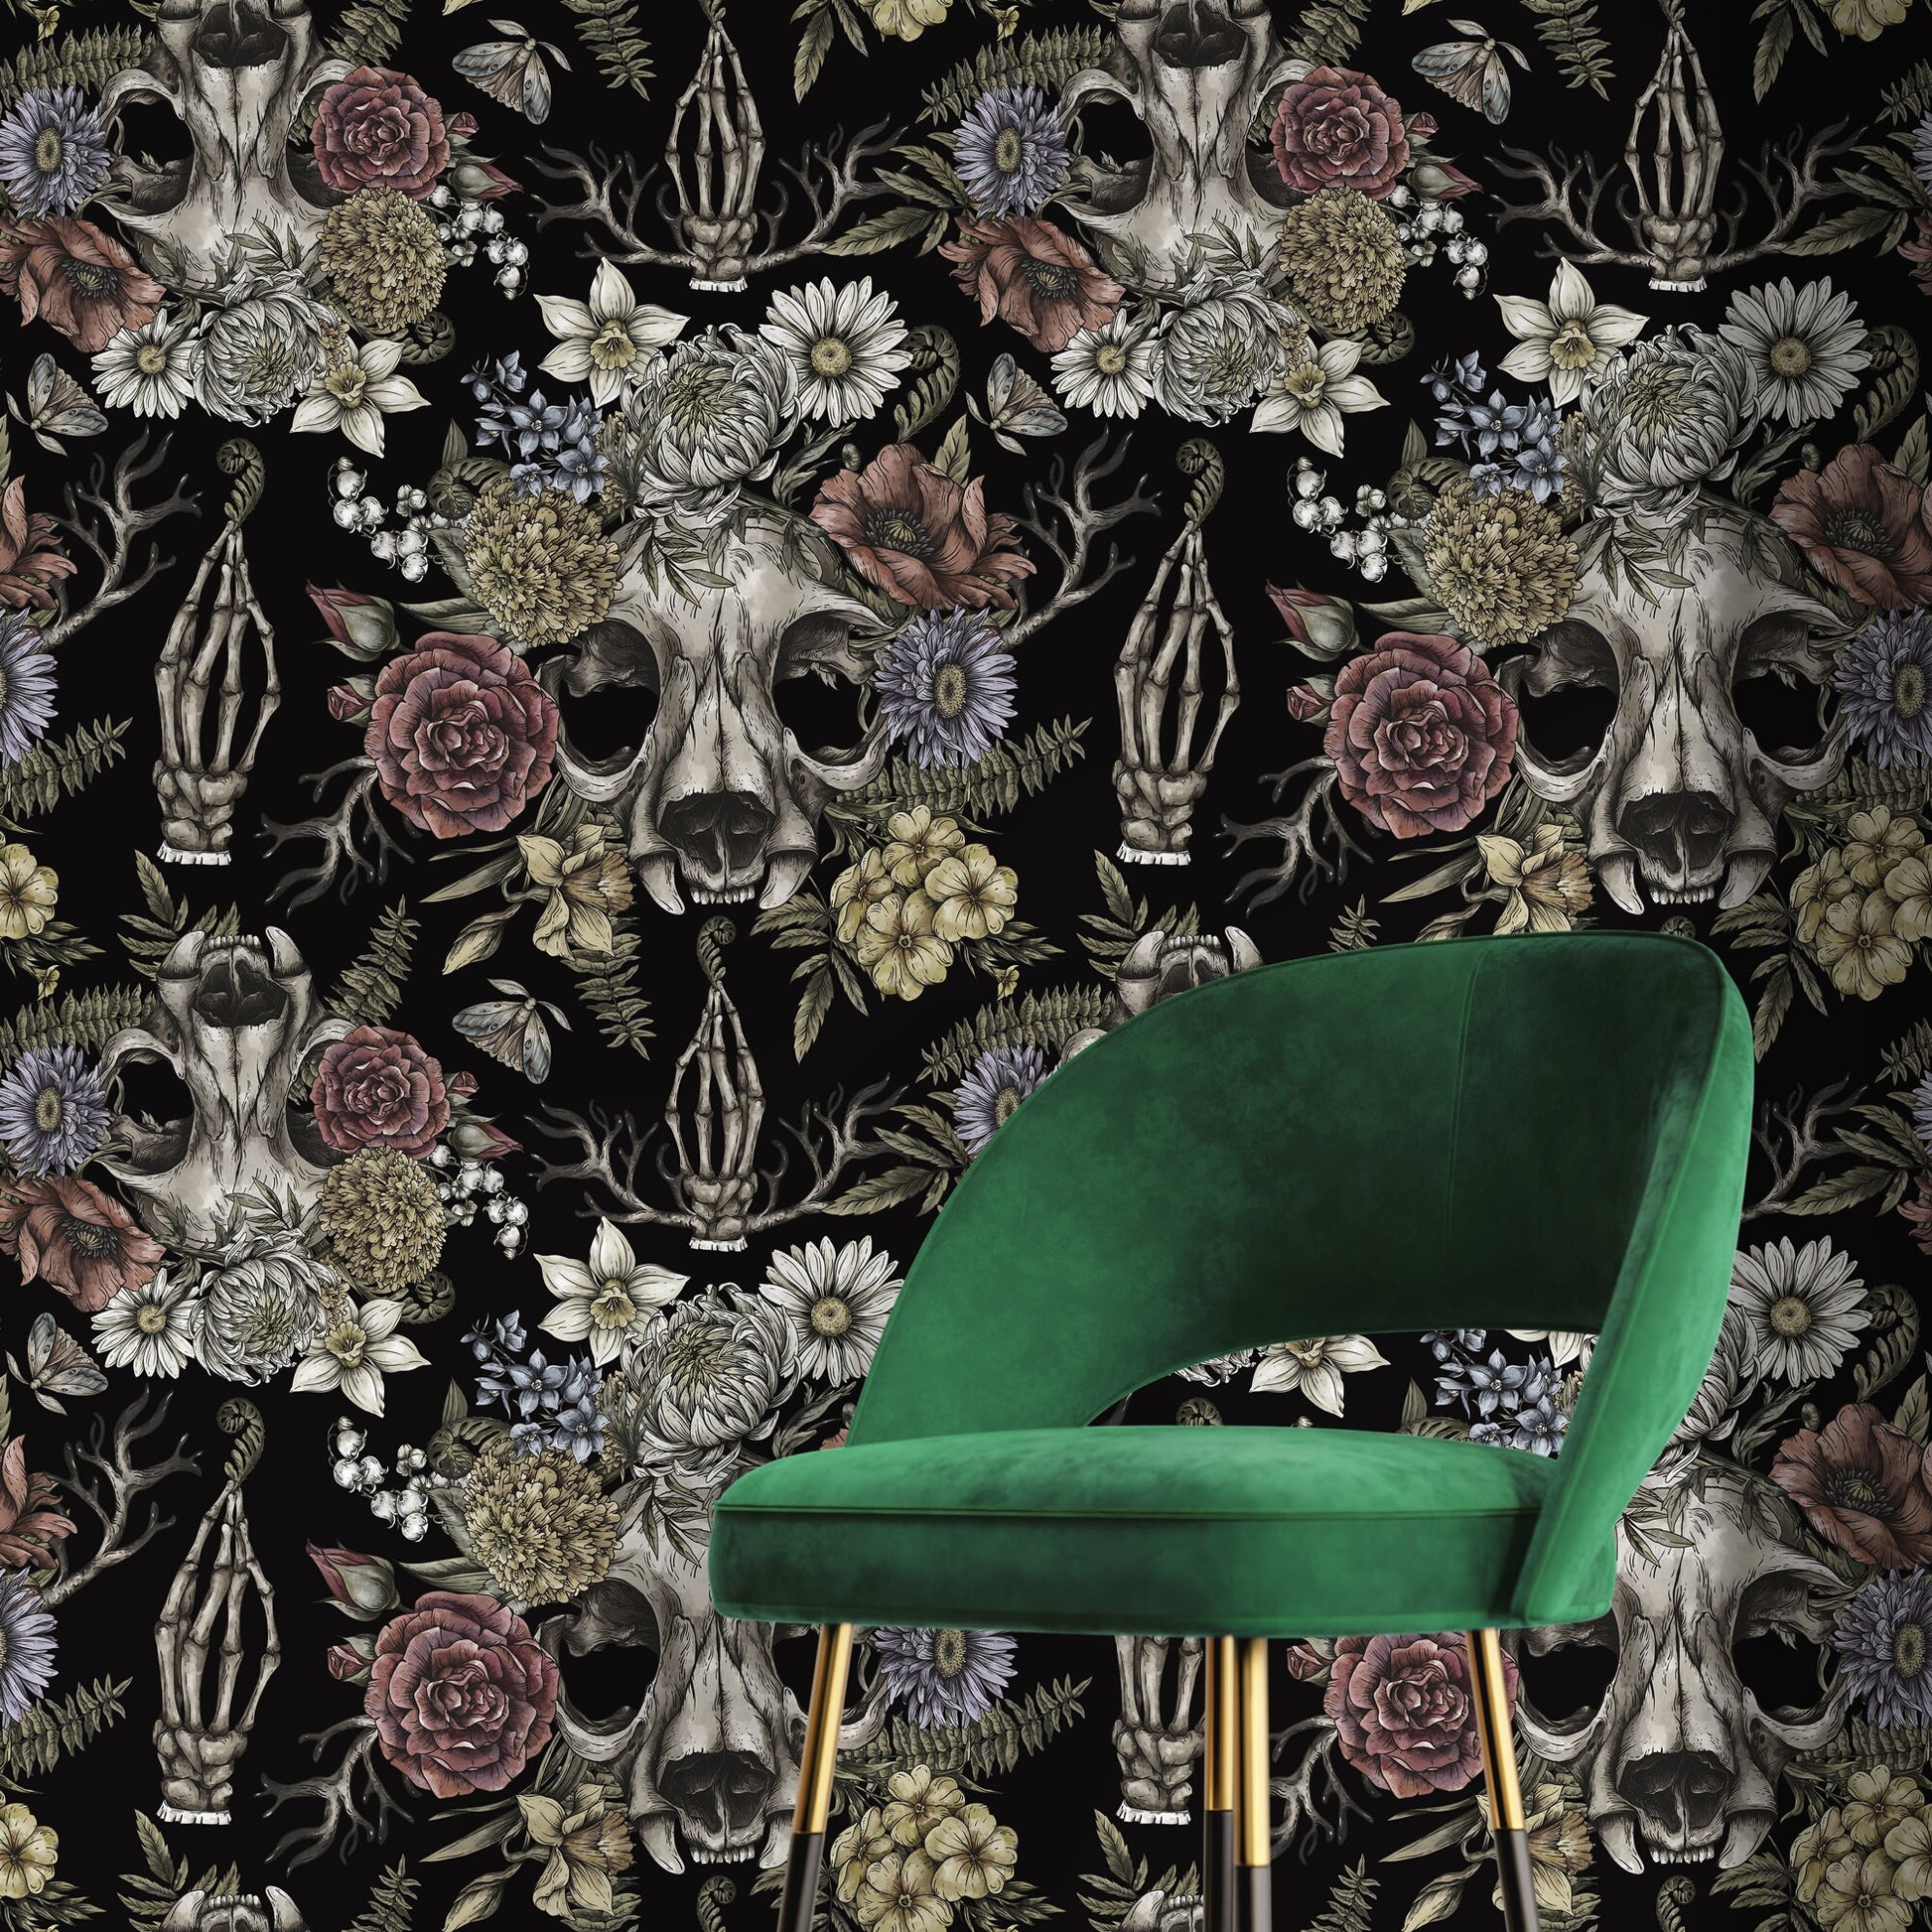 Gothic and Floral Wallpaper Skull and Peony Wallpaper Peel and Stick a 